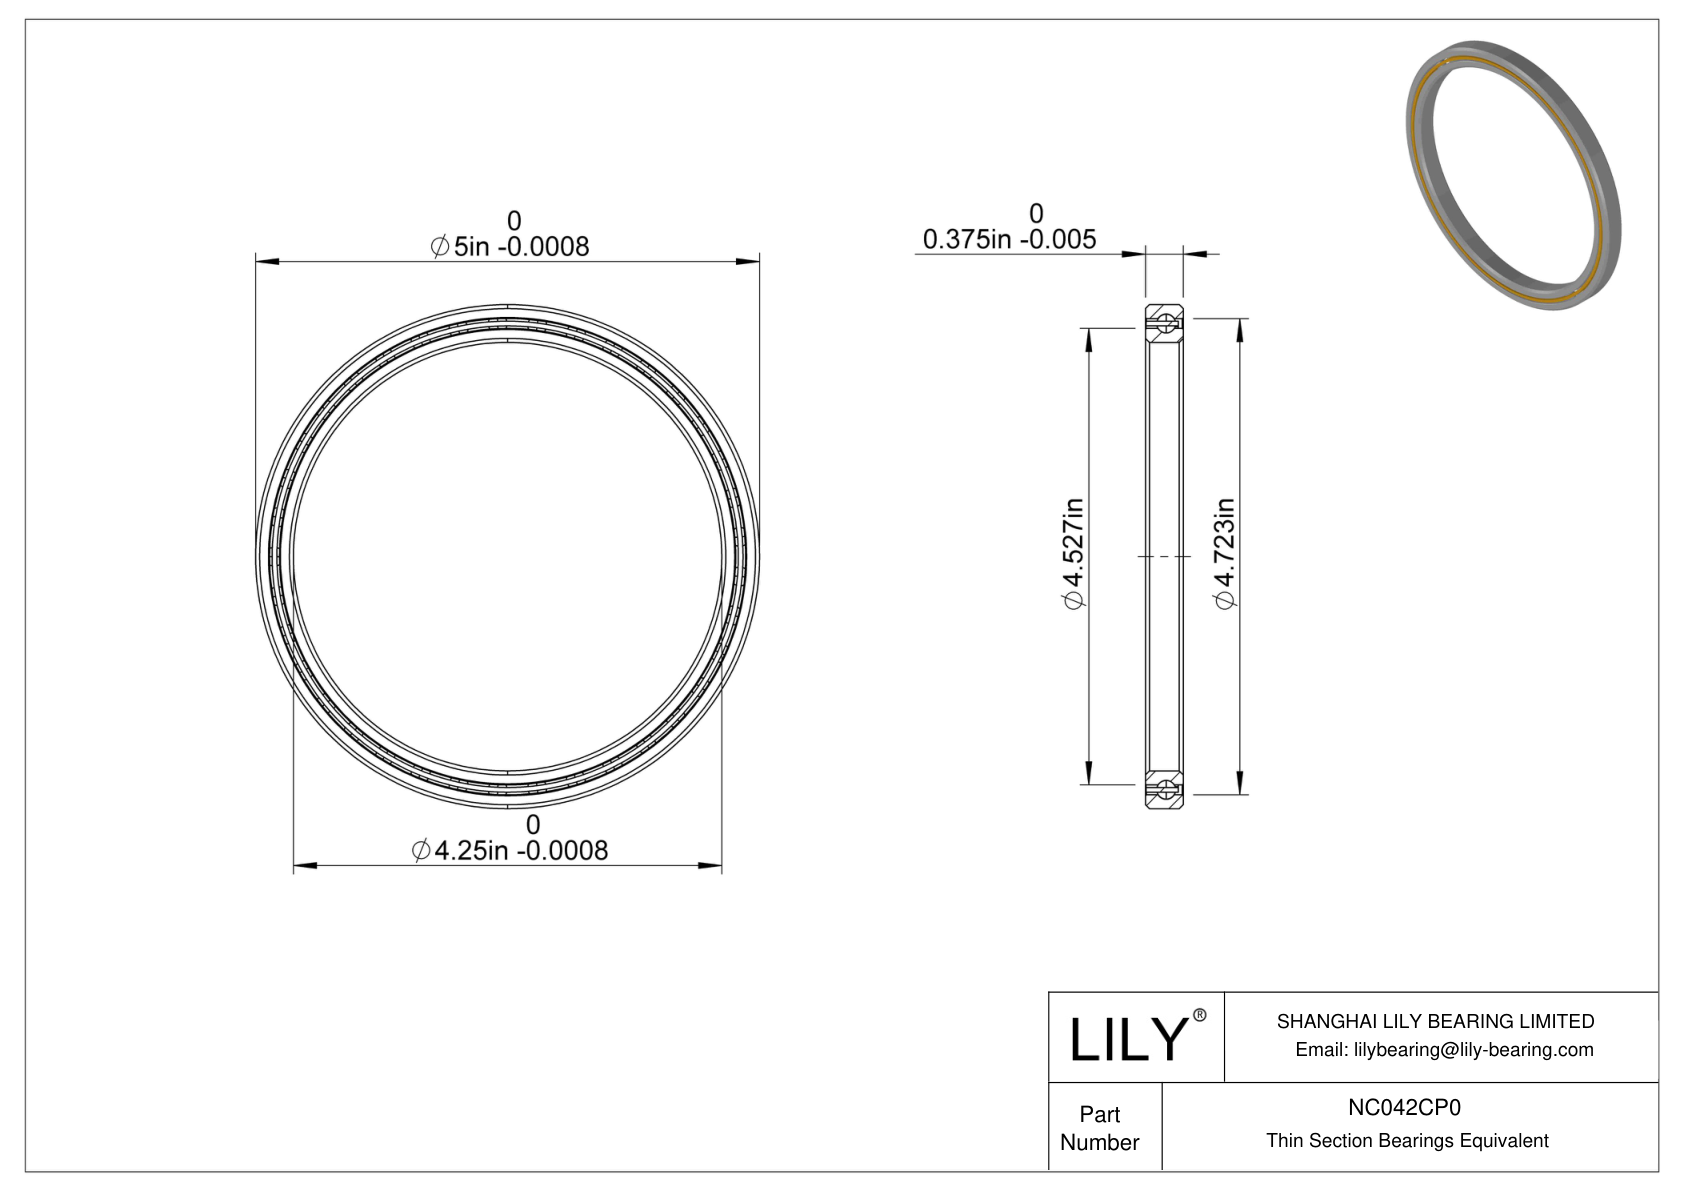 NC042CP0 Constant Section (CS) Bearings cad drawing